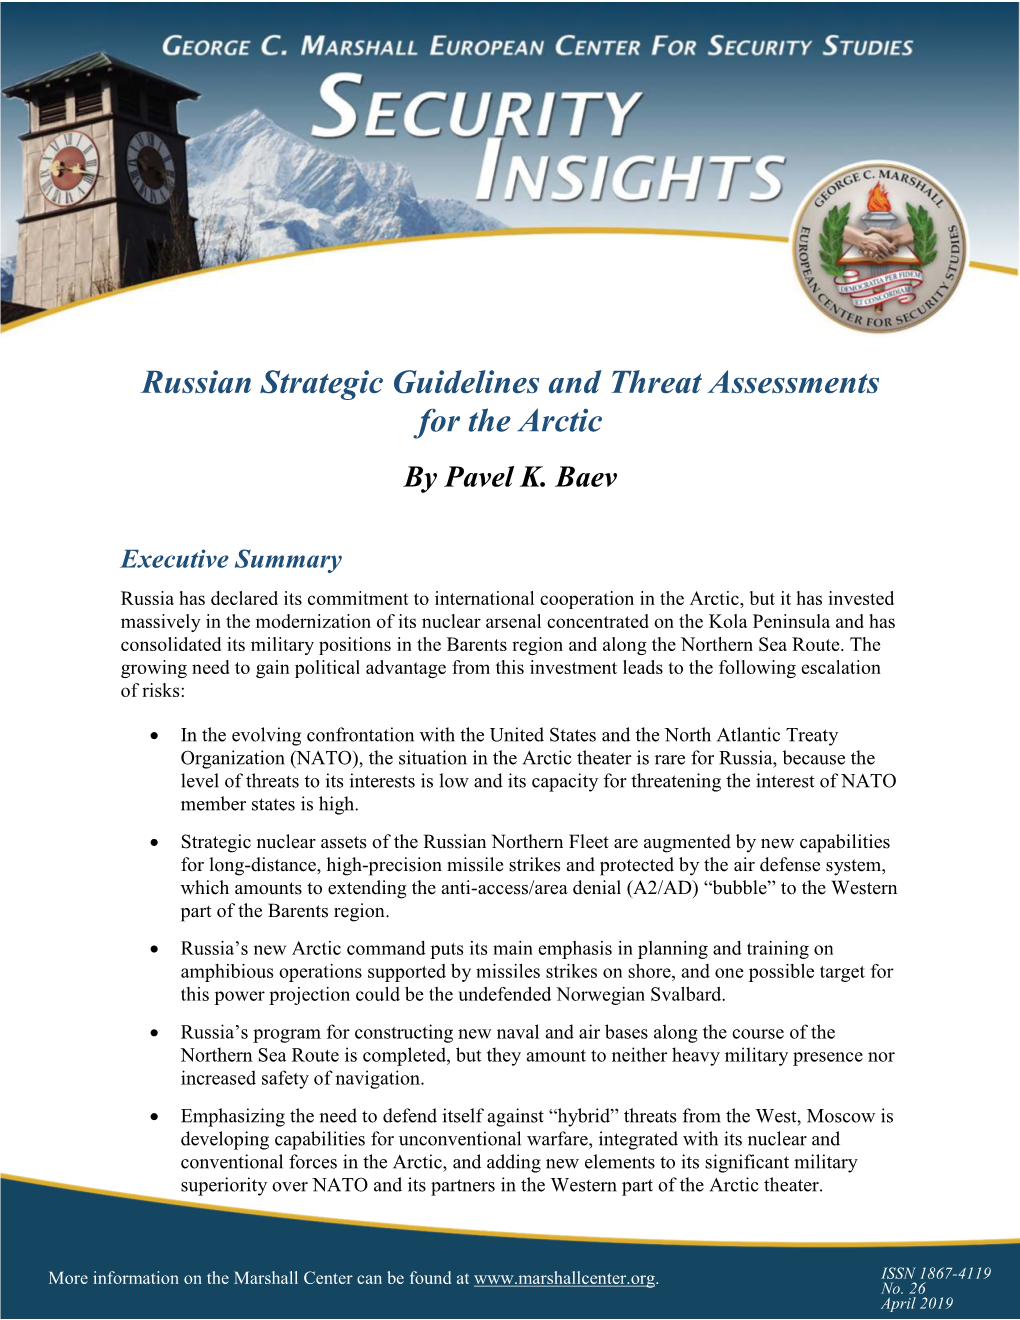 Russian Strategic Guidelines and Threat Assessments for the Arctic by Pavel K